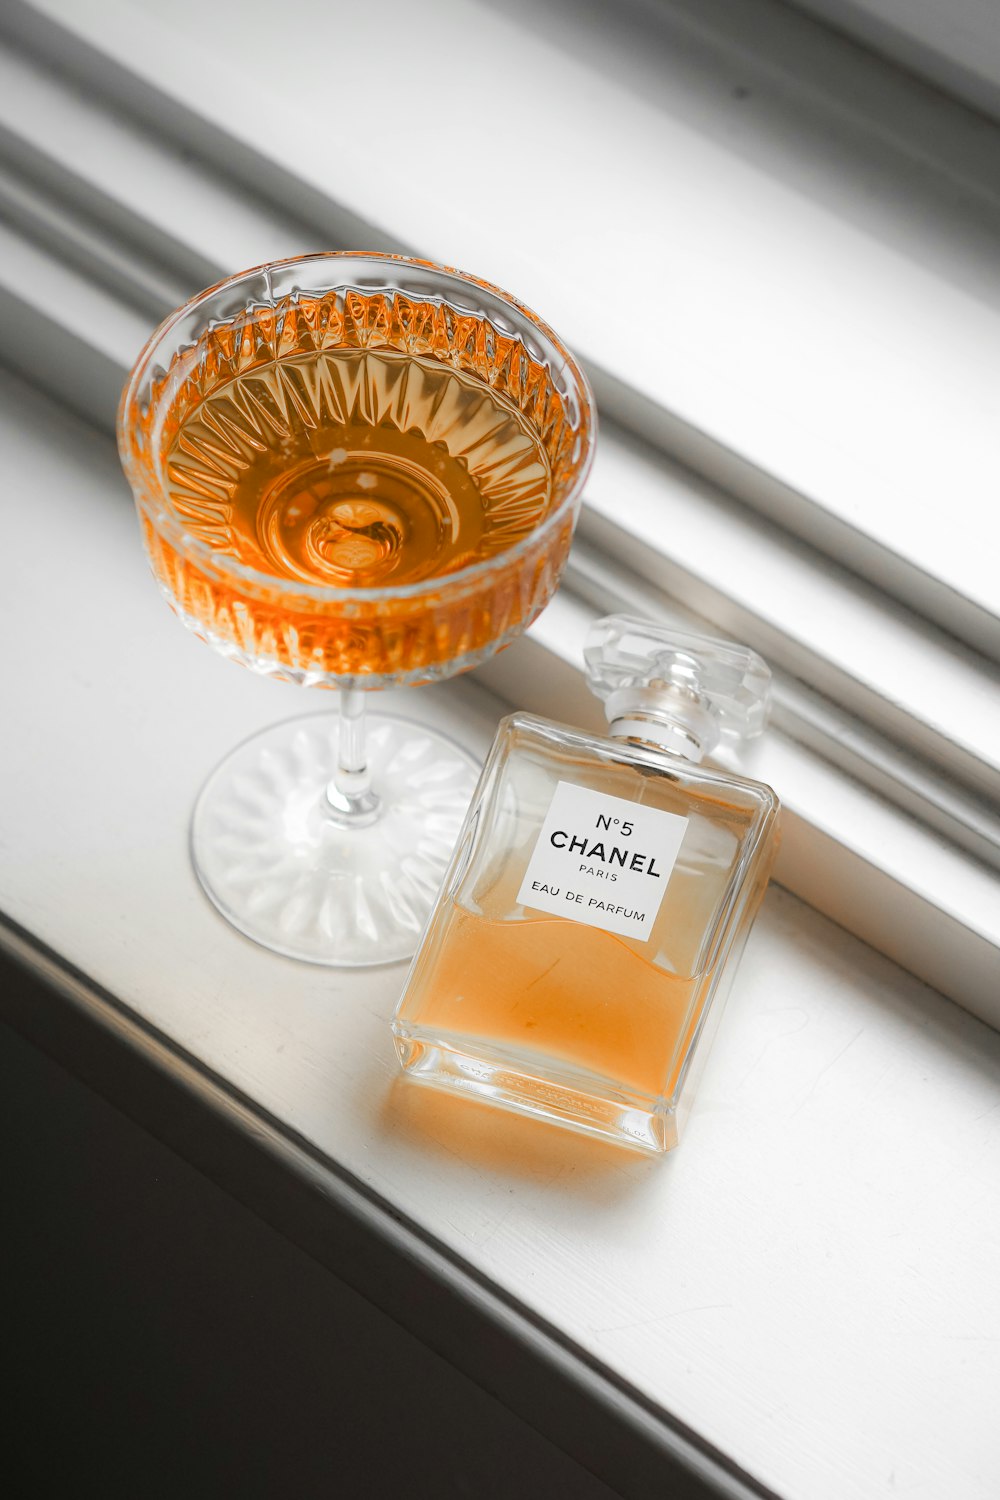 a bottle of chanel next to a glass on a window sill